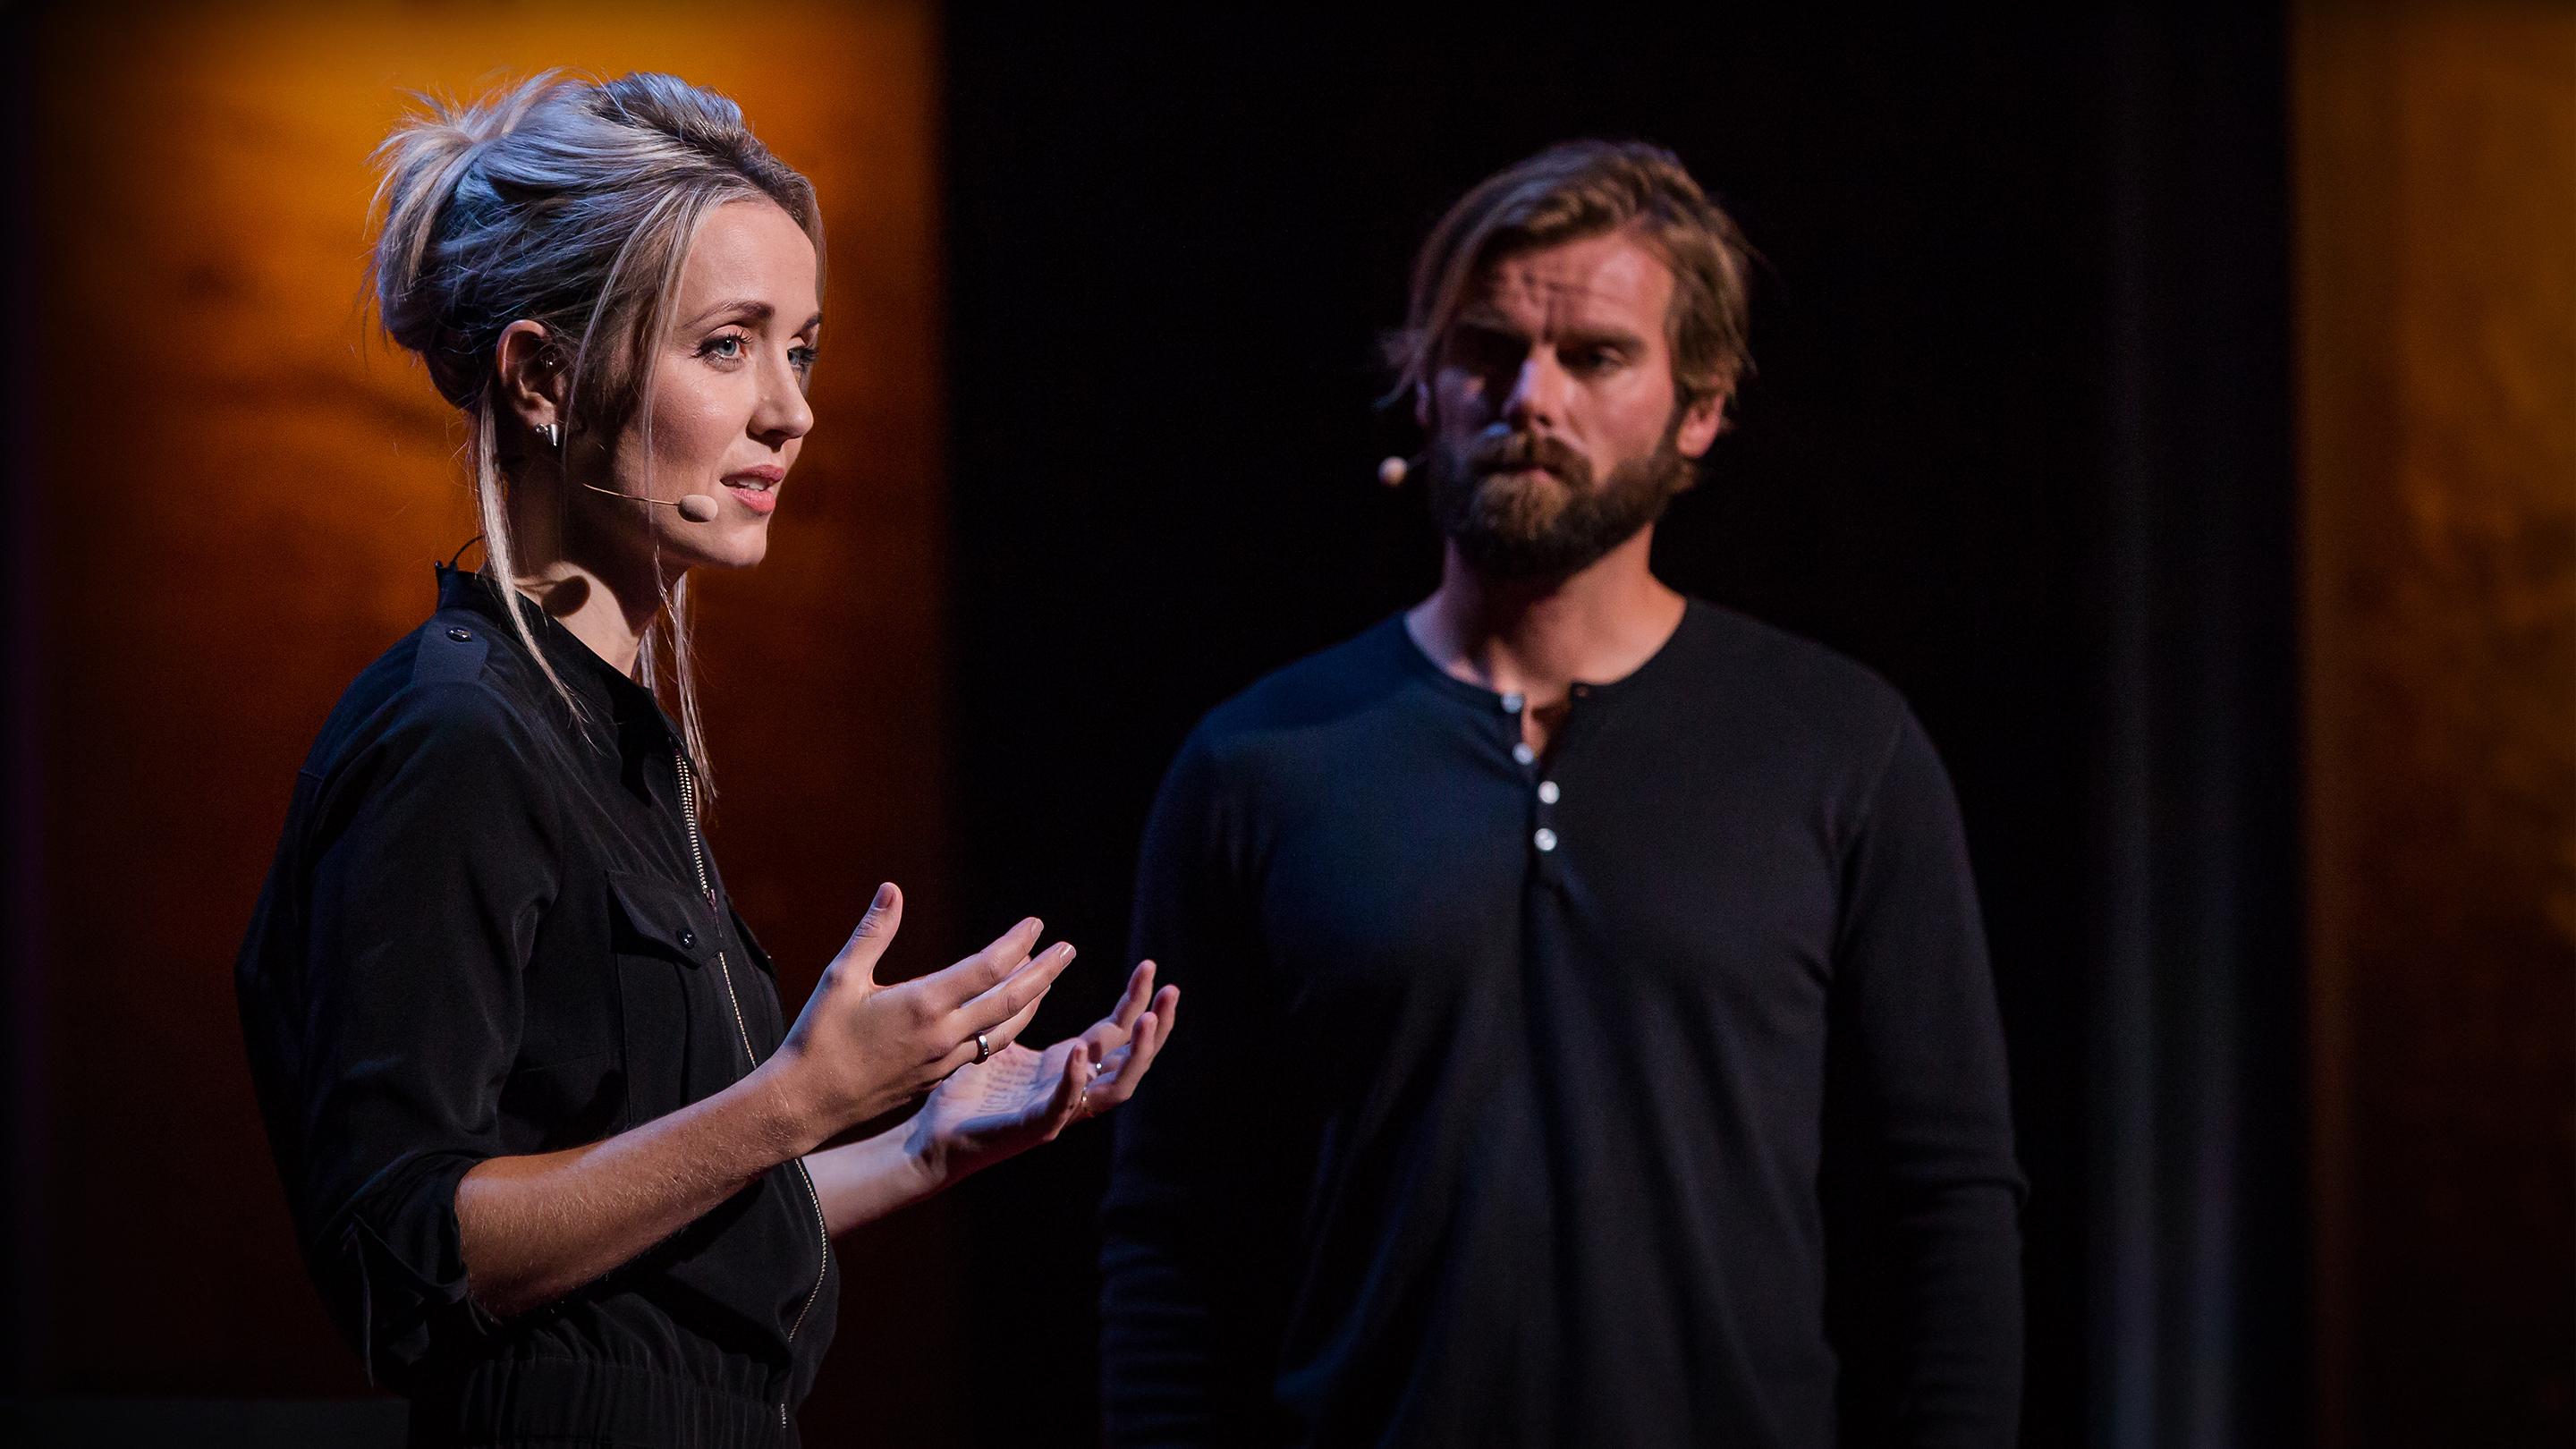 Thordis Elva and Tom Stranger: Our story of rape and reconciliation | TED Talk